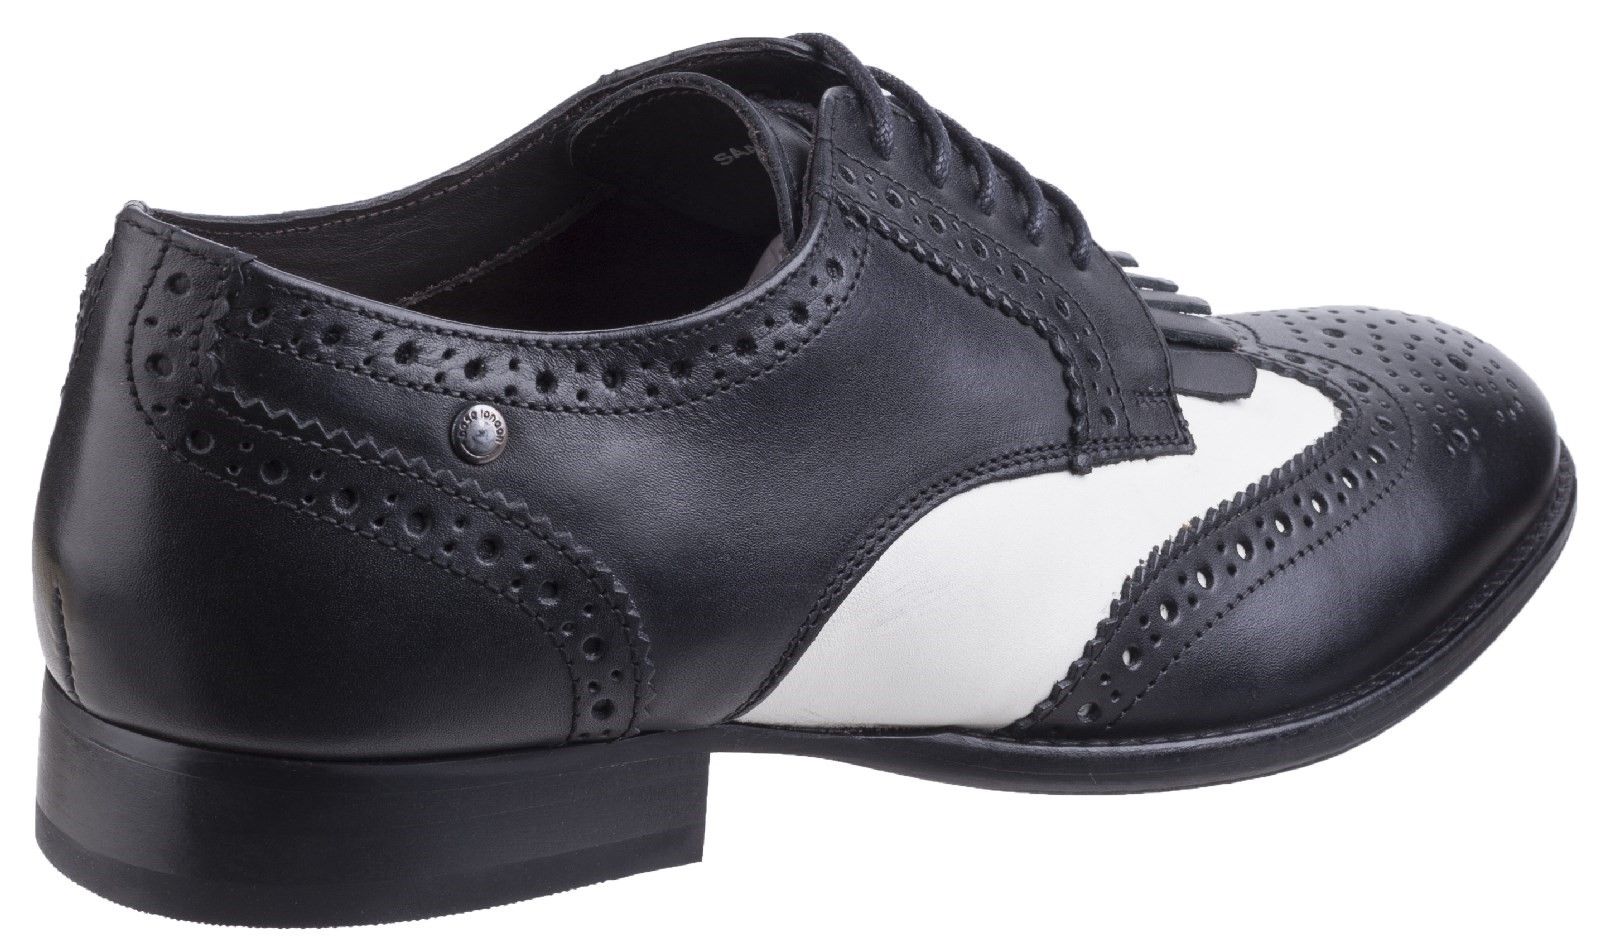 Bartley is a fringed brogue from the Base London Fashionista Range. Inspired by footwear from the 1920s, this formal shoe looks fresh out of La La Land...or do I mean Moonlight? This derby will perfect any fitted suit. High quality waxy leather with deep shine. 
High quality leather lining.